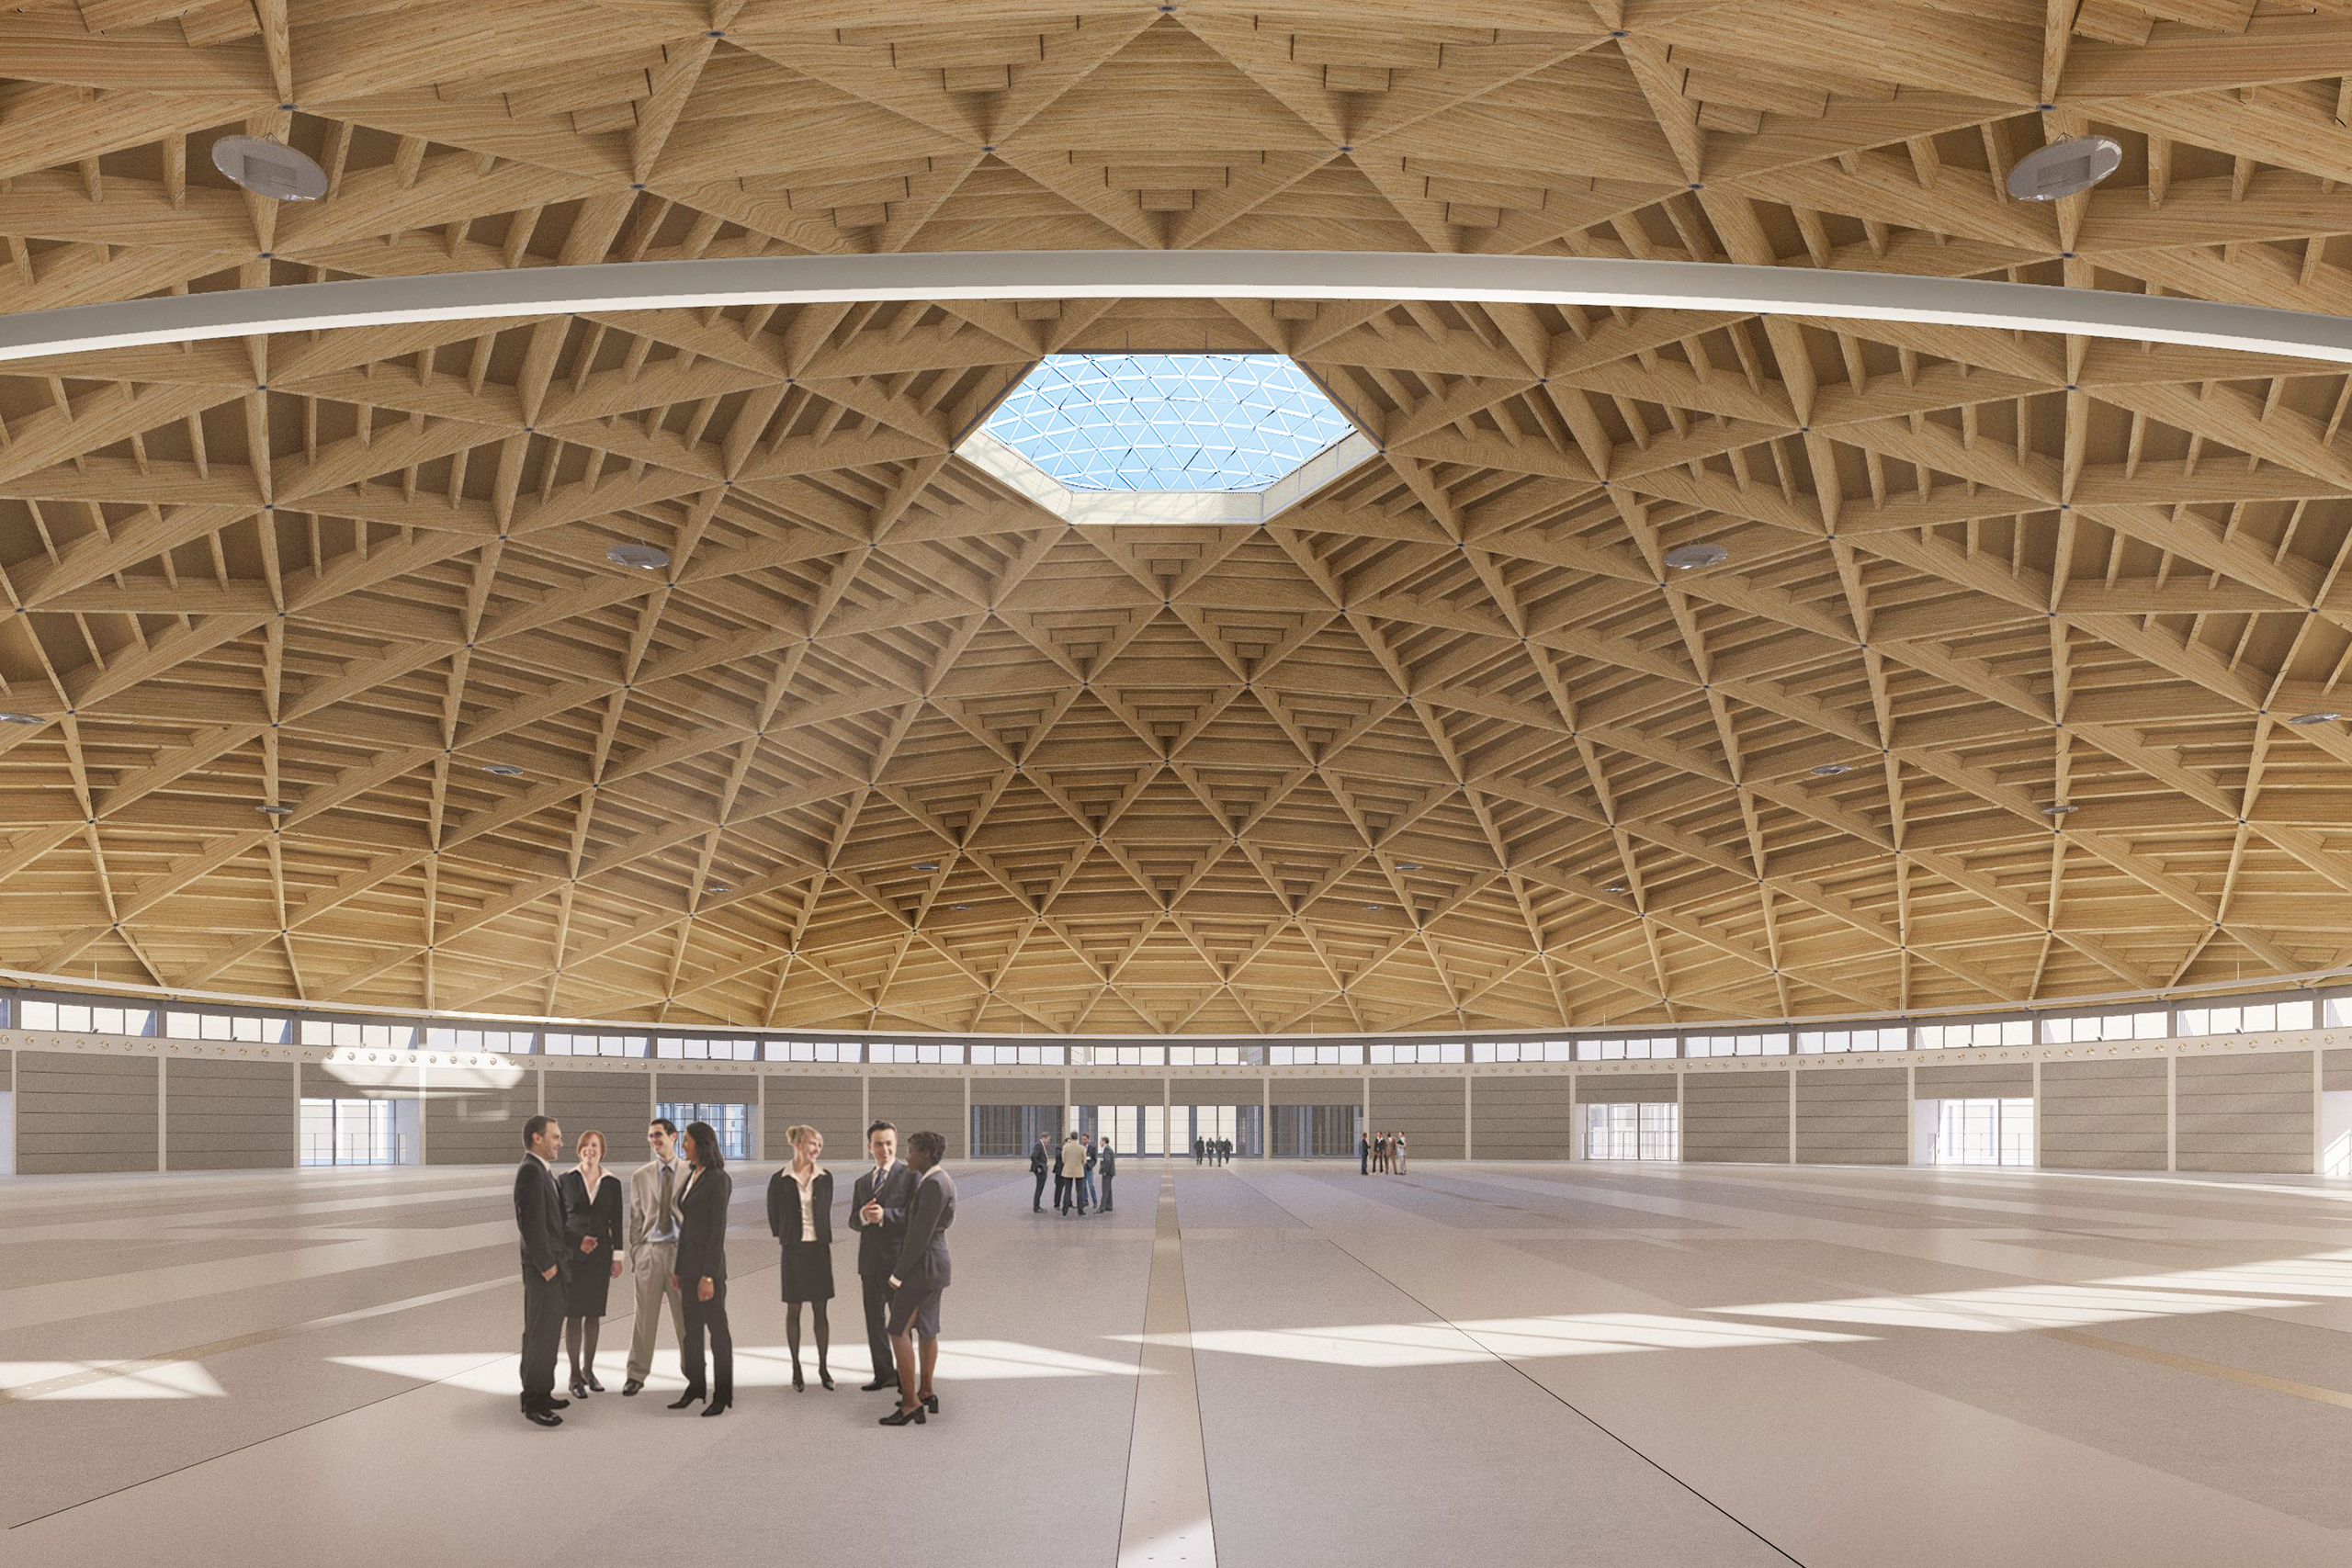 Interior renderings of the new circular pavilion for expansion of the Rimini Fair.